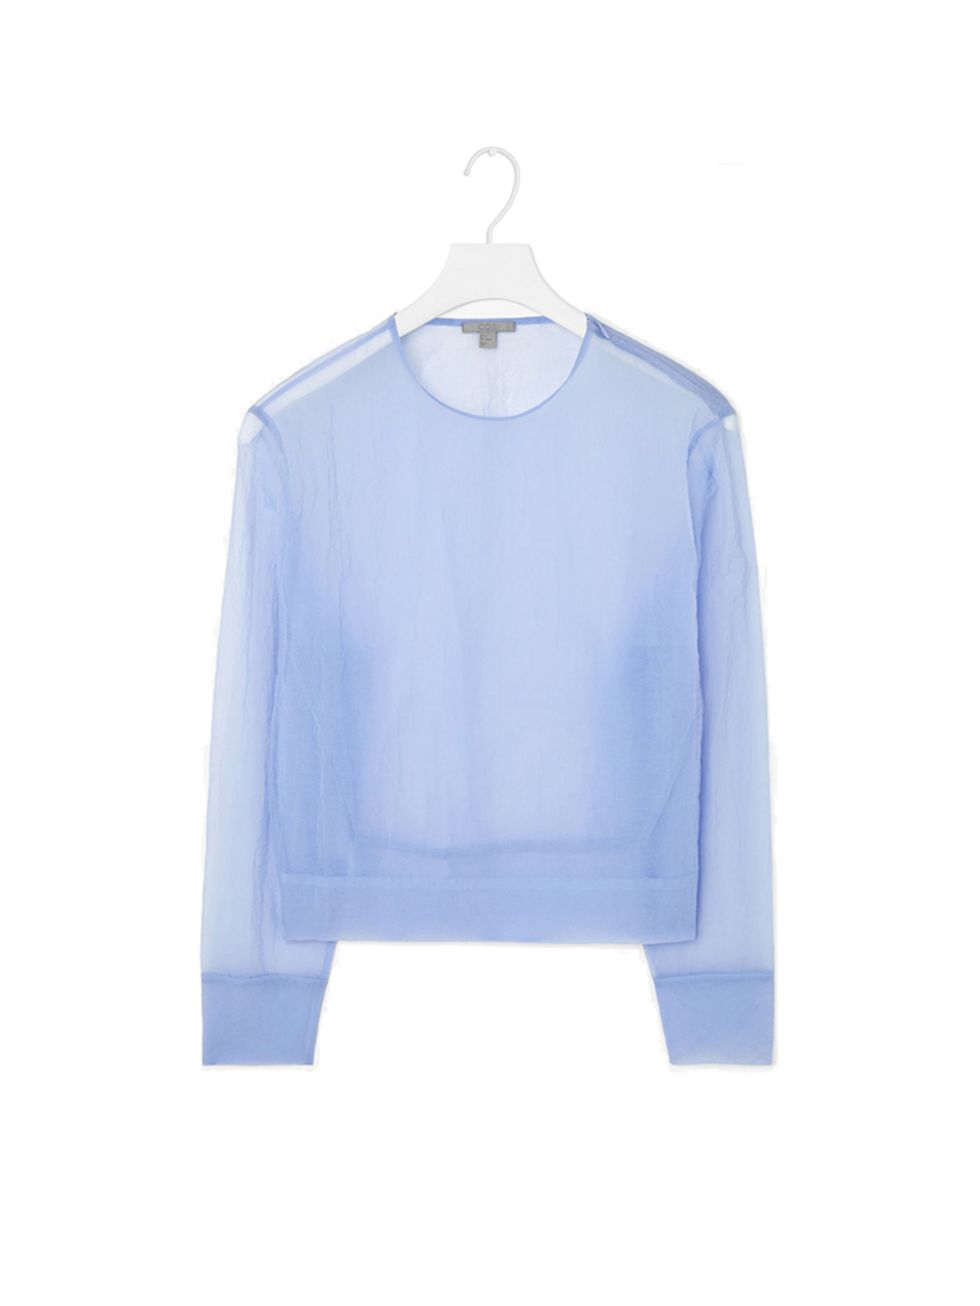 <p>Fashion Intern Jeanne Calmet is the first in line for this season's soft colour palette trend. </p>

<p><a href="http://www.cosstores.com/gb/Women/New/Sheer_round-neck_top/32993034-25887465.1#c-24479" target="_blank">Cos</a> shirt, £59</p>